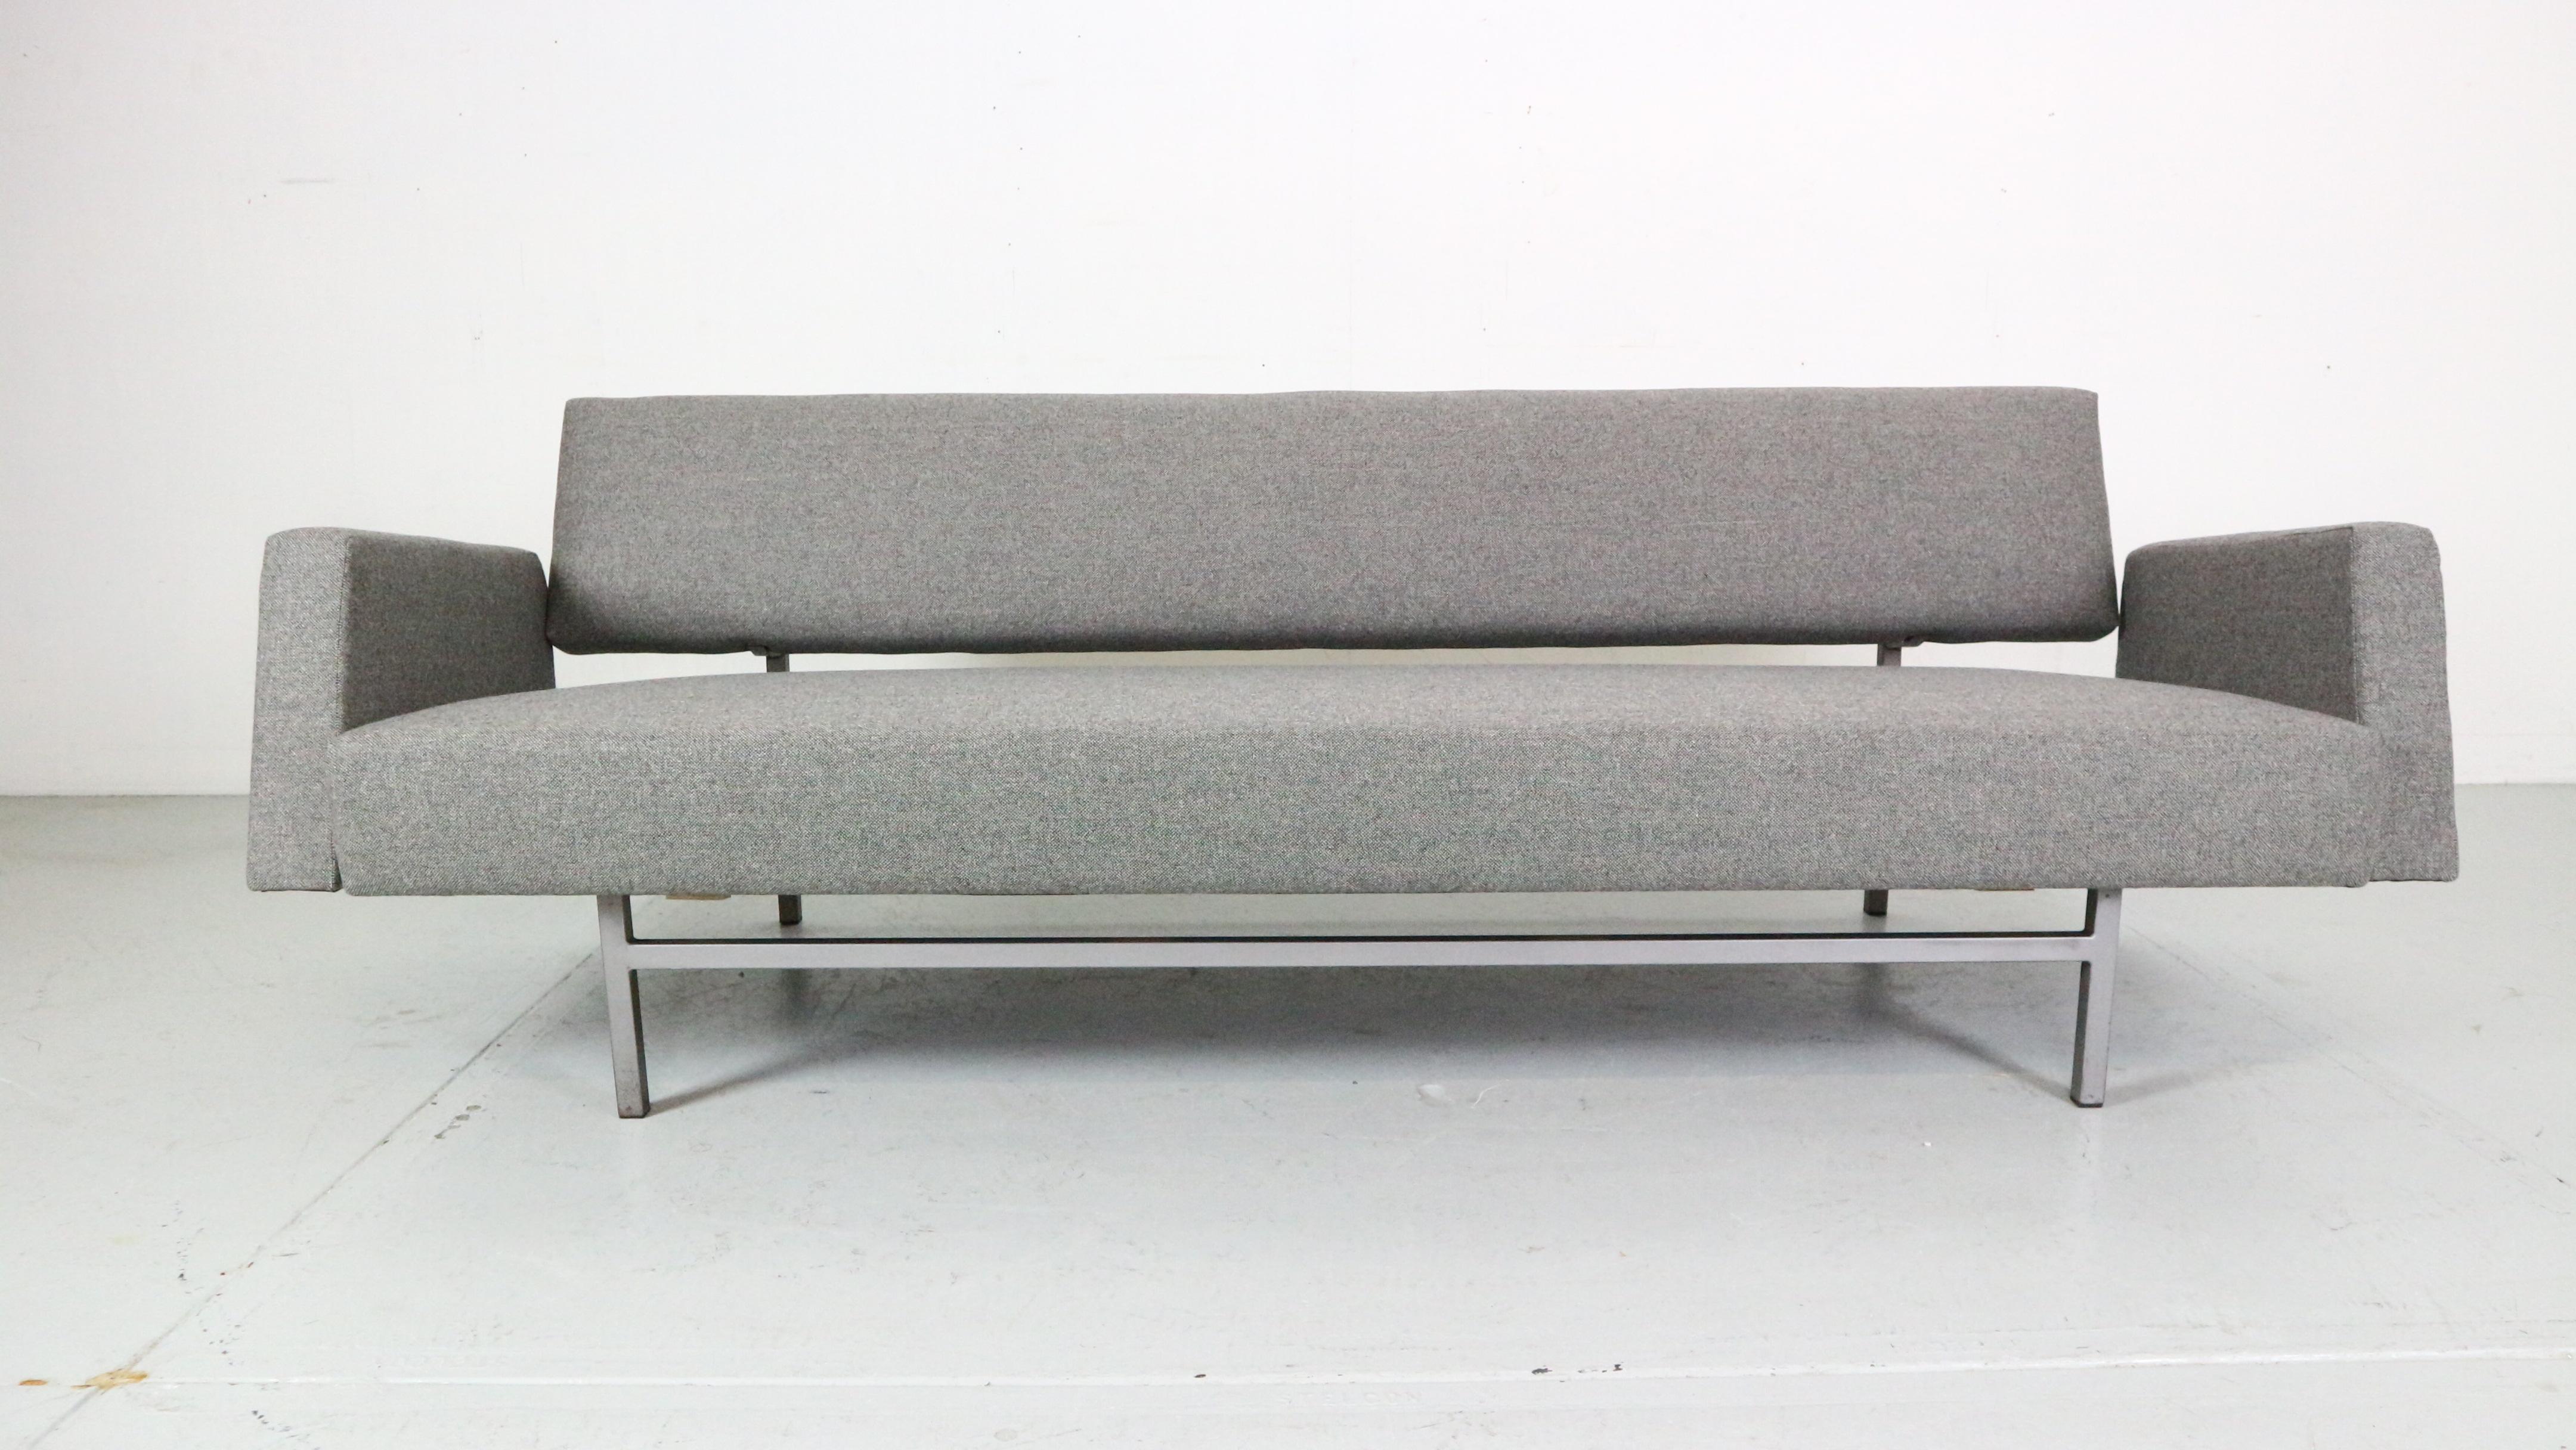 Rare sofa designed by Rob Parry for Gelderland, 1960s.
Minimalistic and elegant Dutch design pride.
With one movement, the seat can be pulled out into a single sofa bed.
Measurements: 89cm.
This sofa has been newly reupholstered with grey furniture